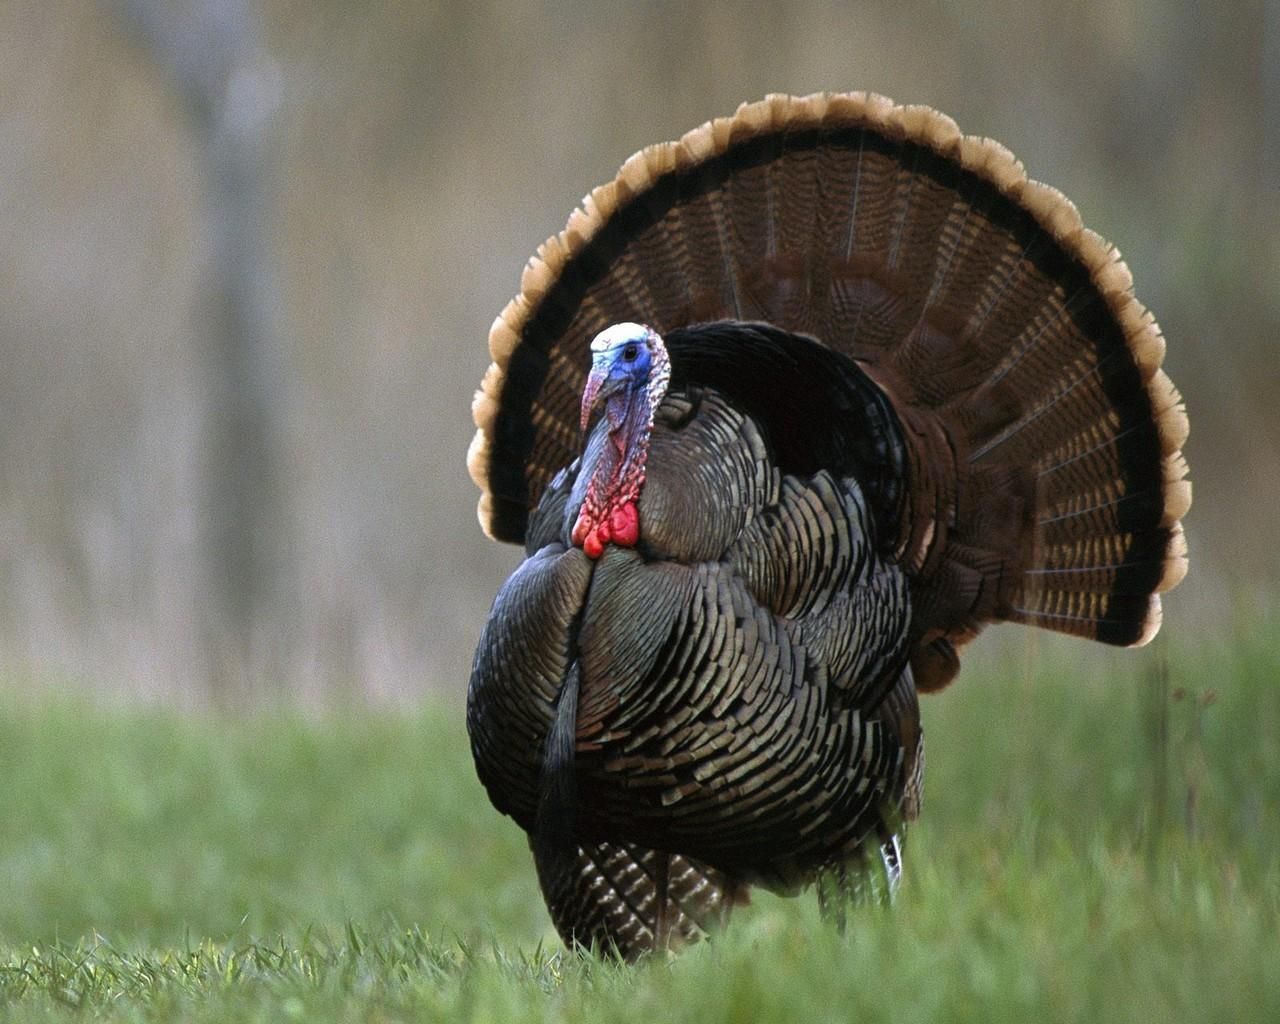 A male turkey displays its feathers in a grassy field. - 1280x1024